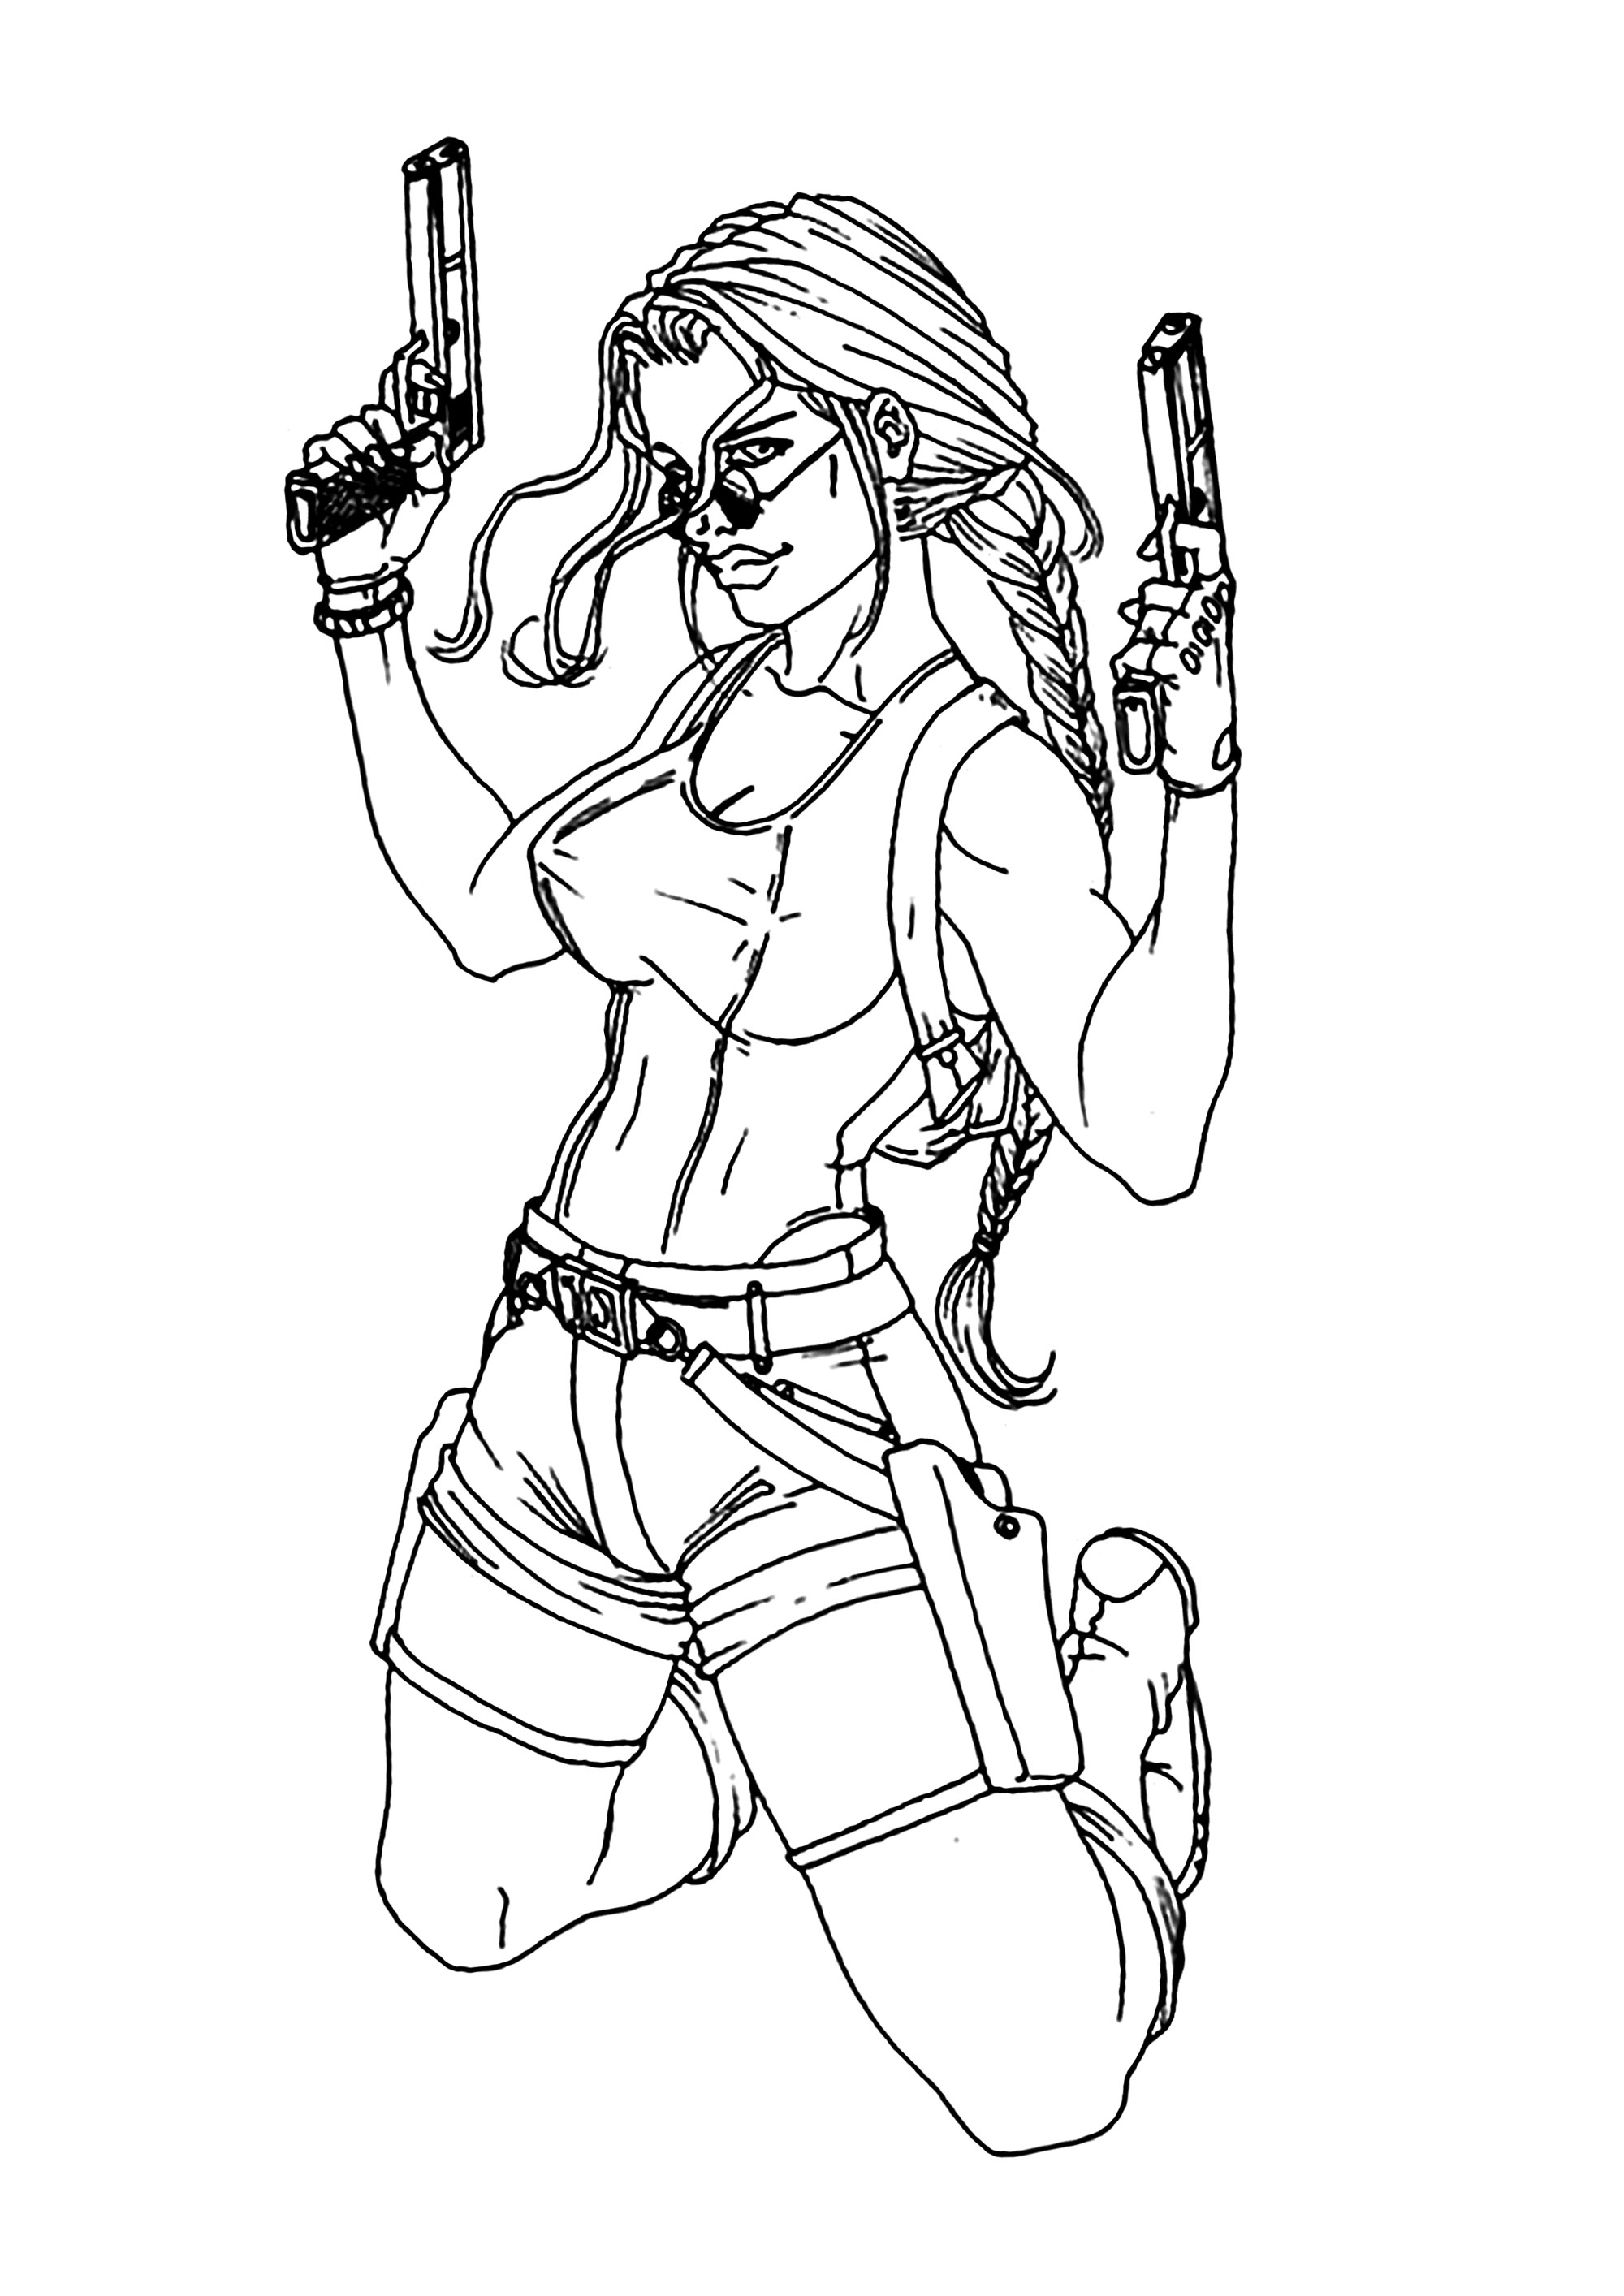 Lara Croft with her glasses and two pistols